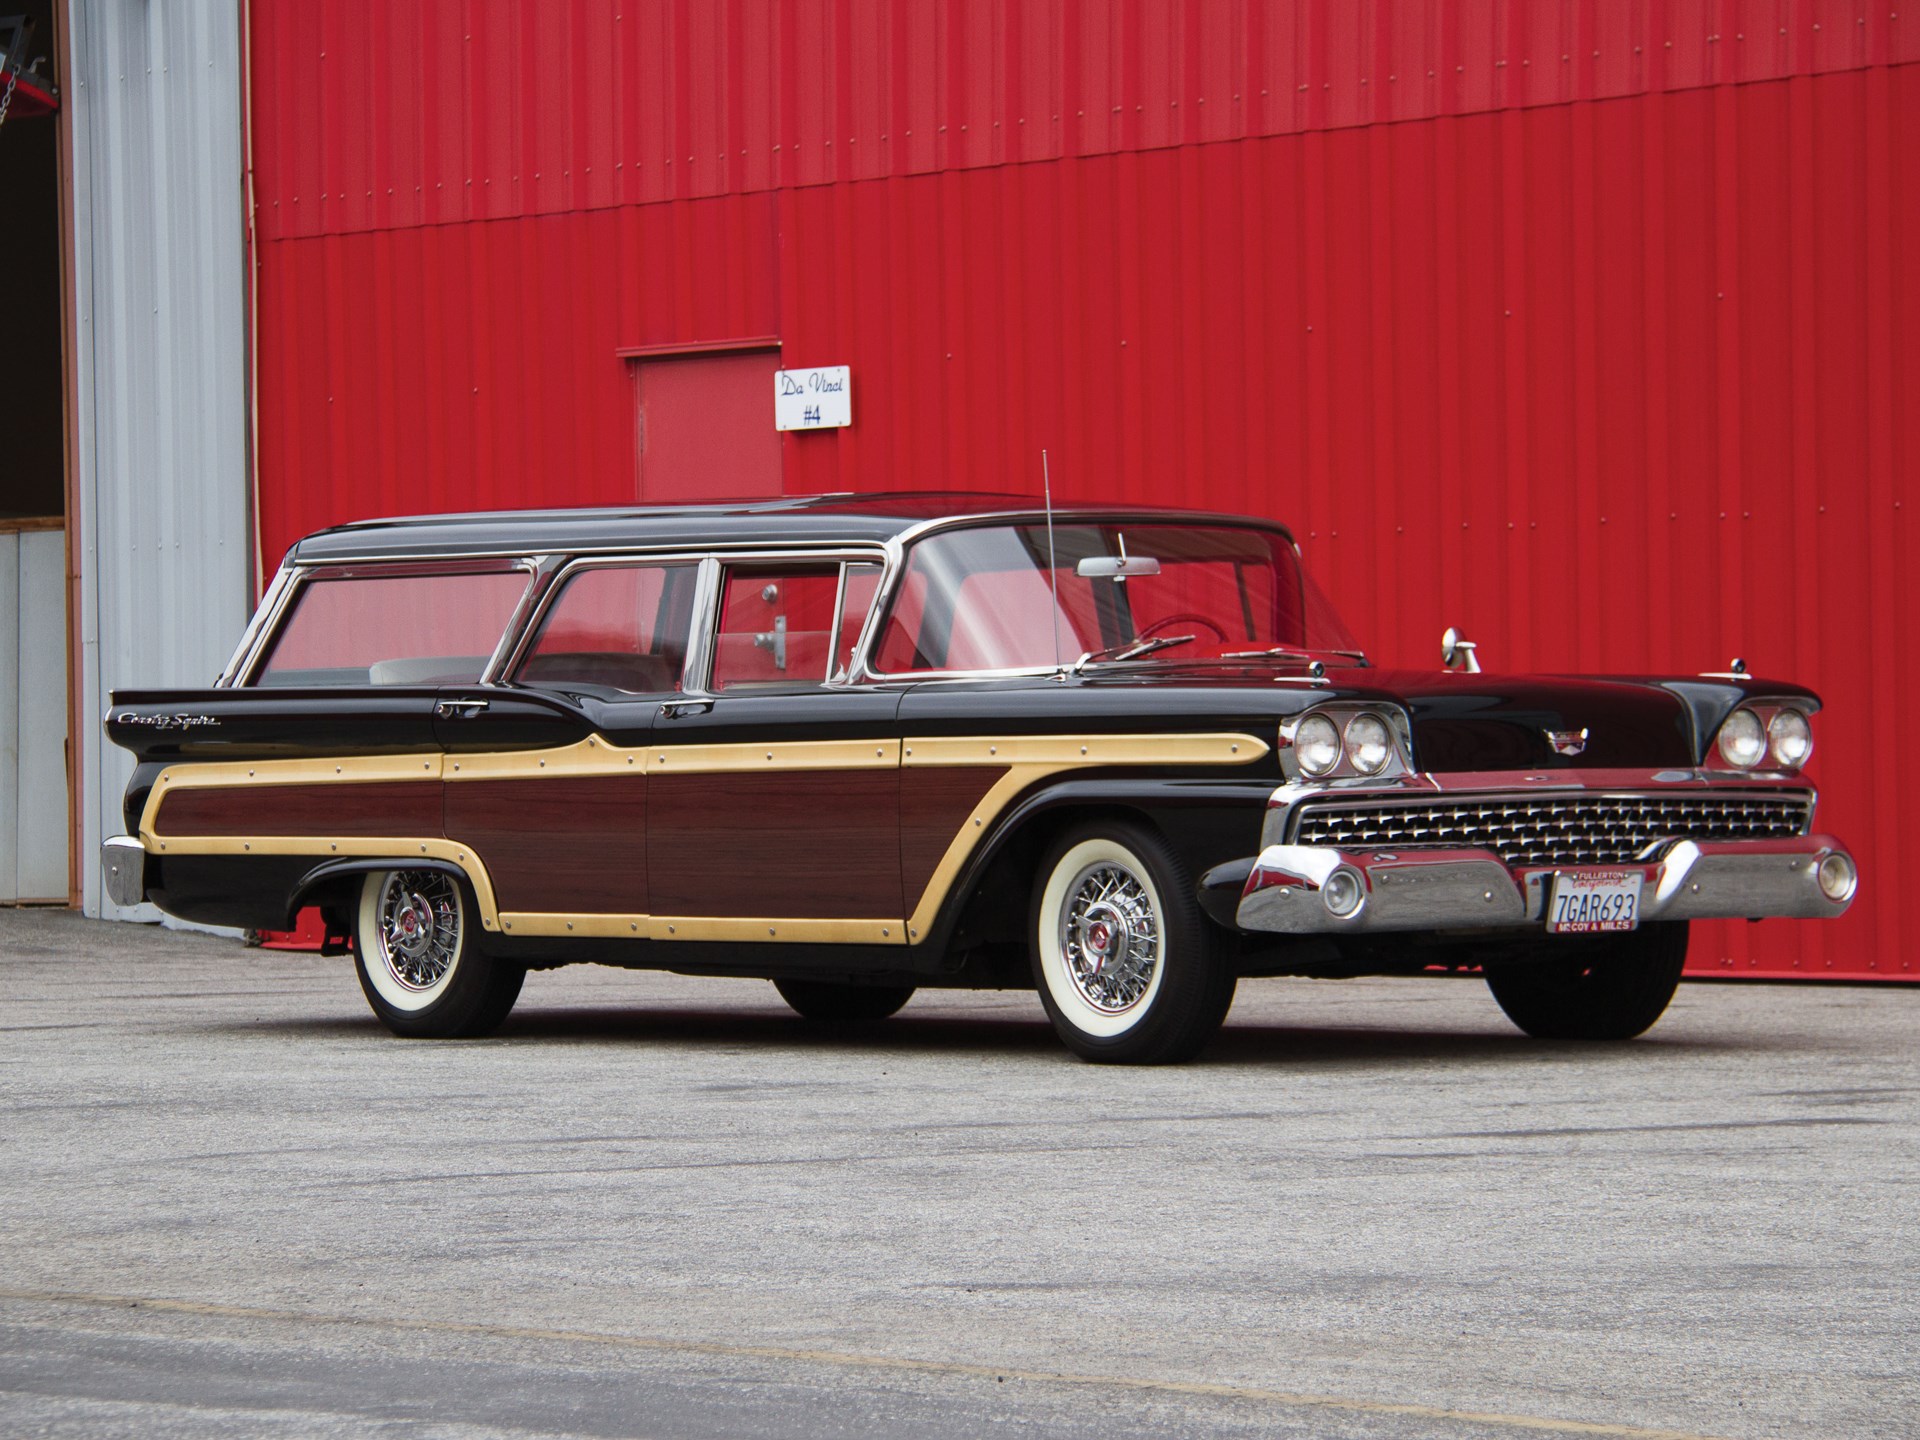 1959 Ford Country Squire for sale at RM Sotheby's California 2015.